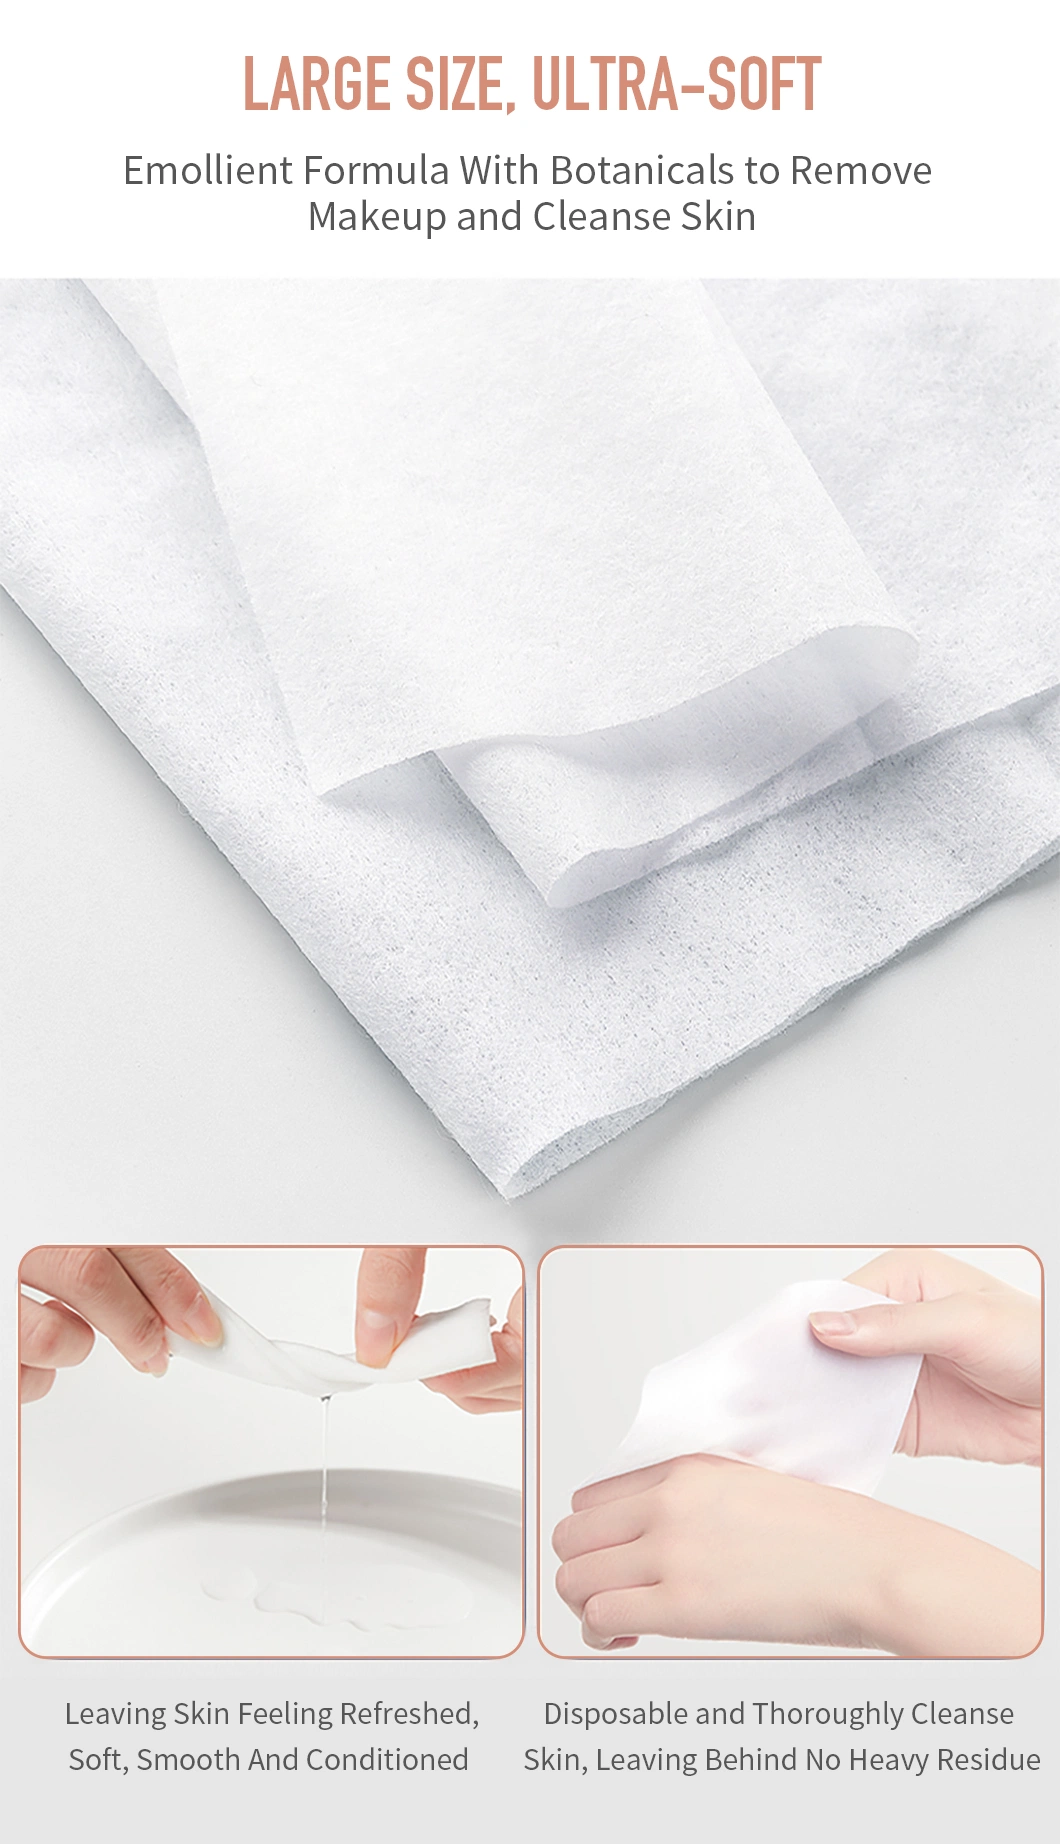 Deep Cleaning Detoxifying Cleaning Exfoliating Facial Wipe Daily Cleansing Charcoal Face Wipe Makeup Remover Adult Wet Wipes